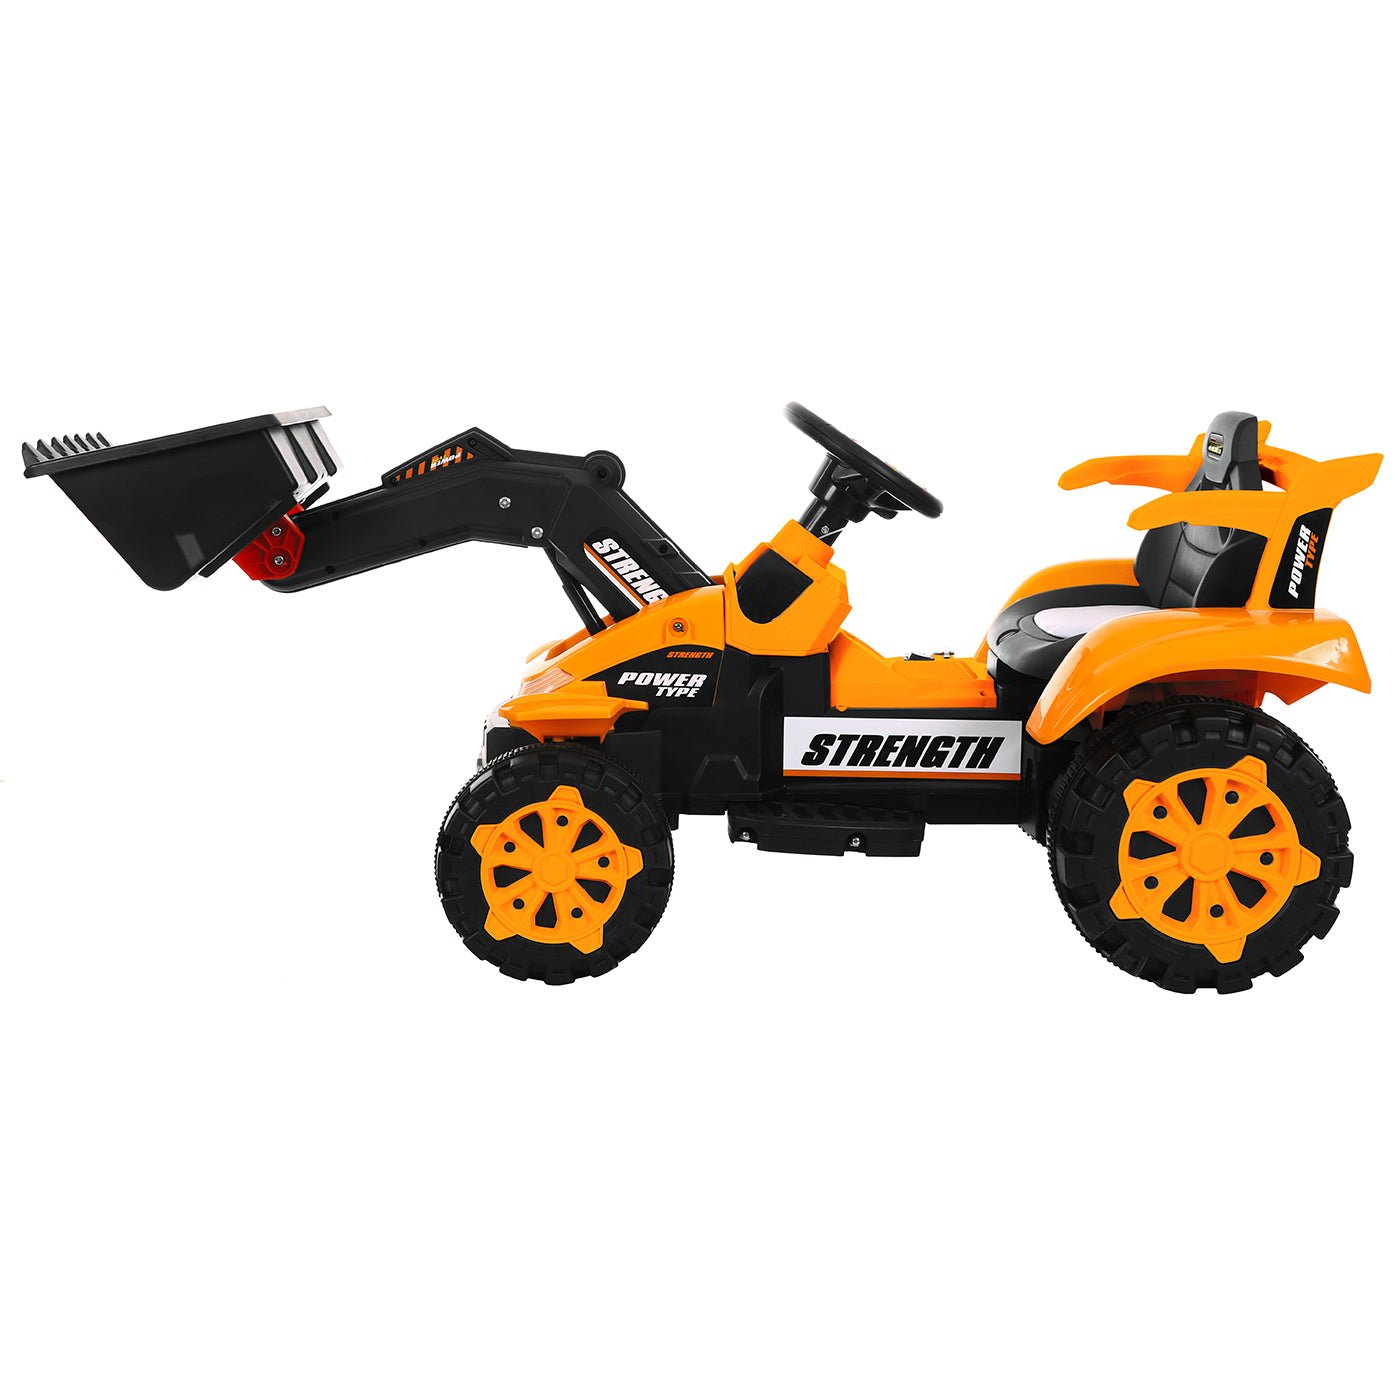 Children's Electronic Ride-on Front Loader for Kids